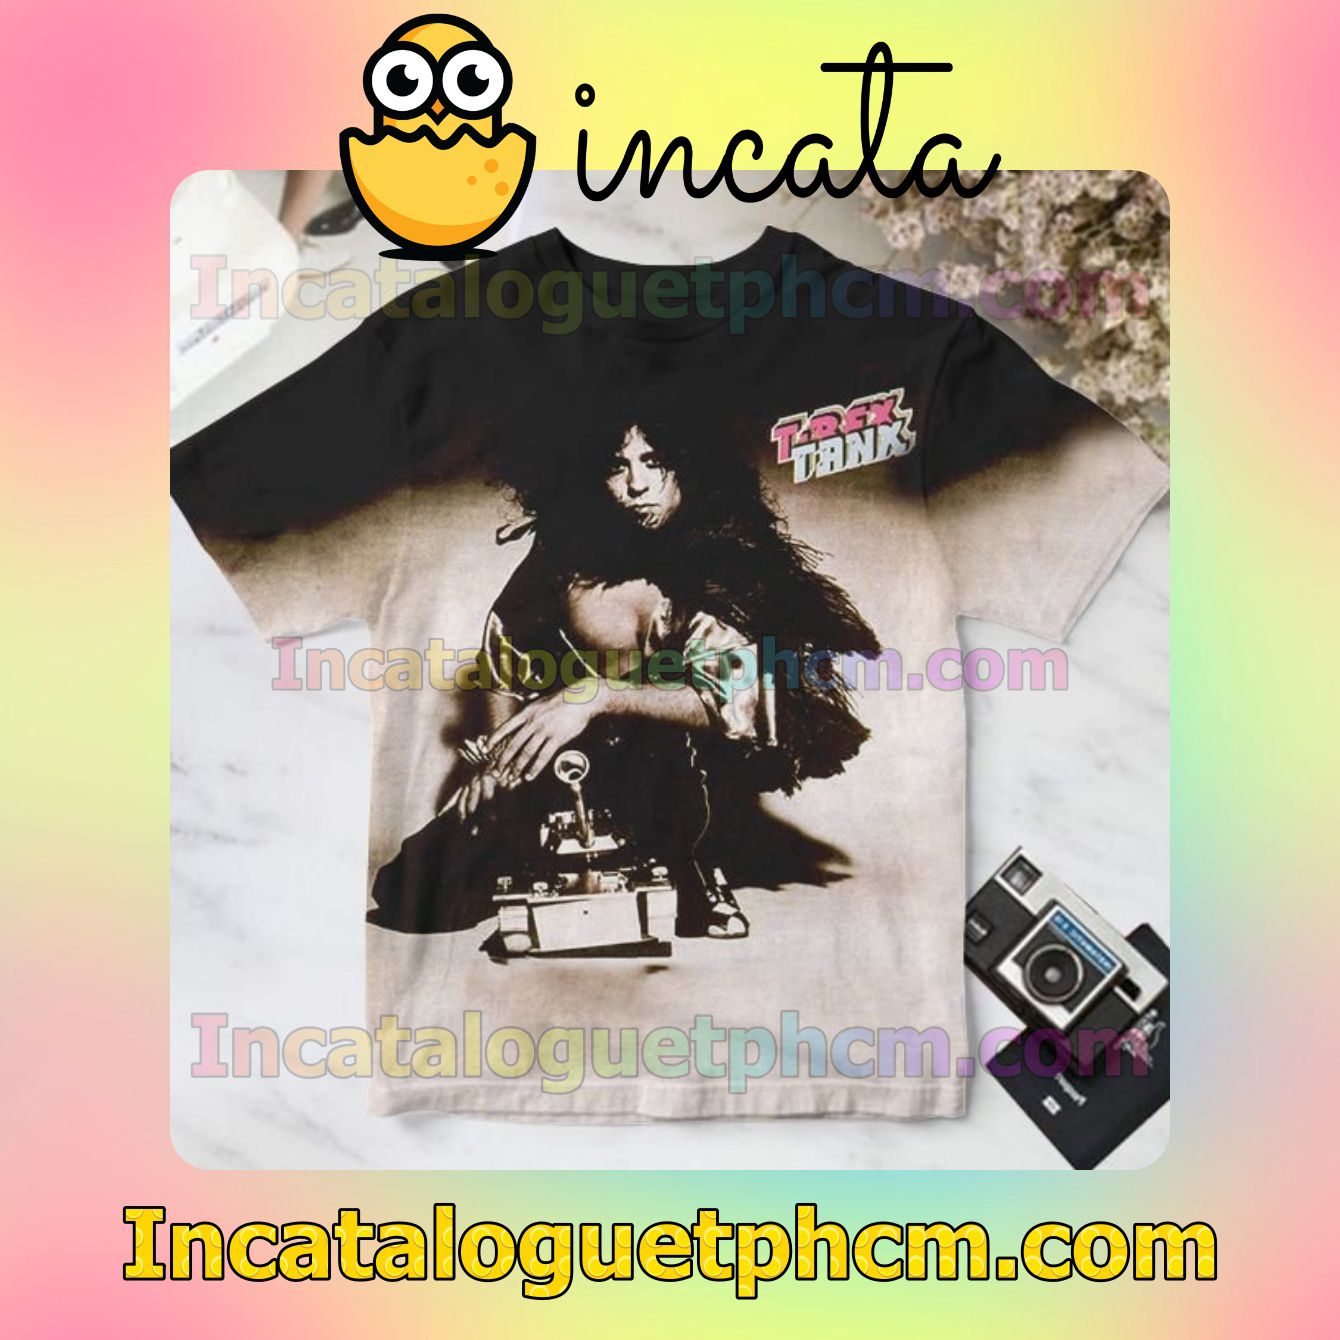 T. Rex Tanx Album Cover Personalized Shirt